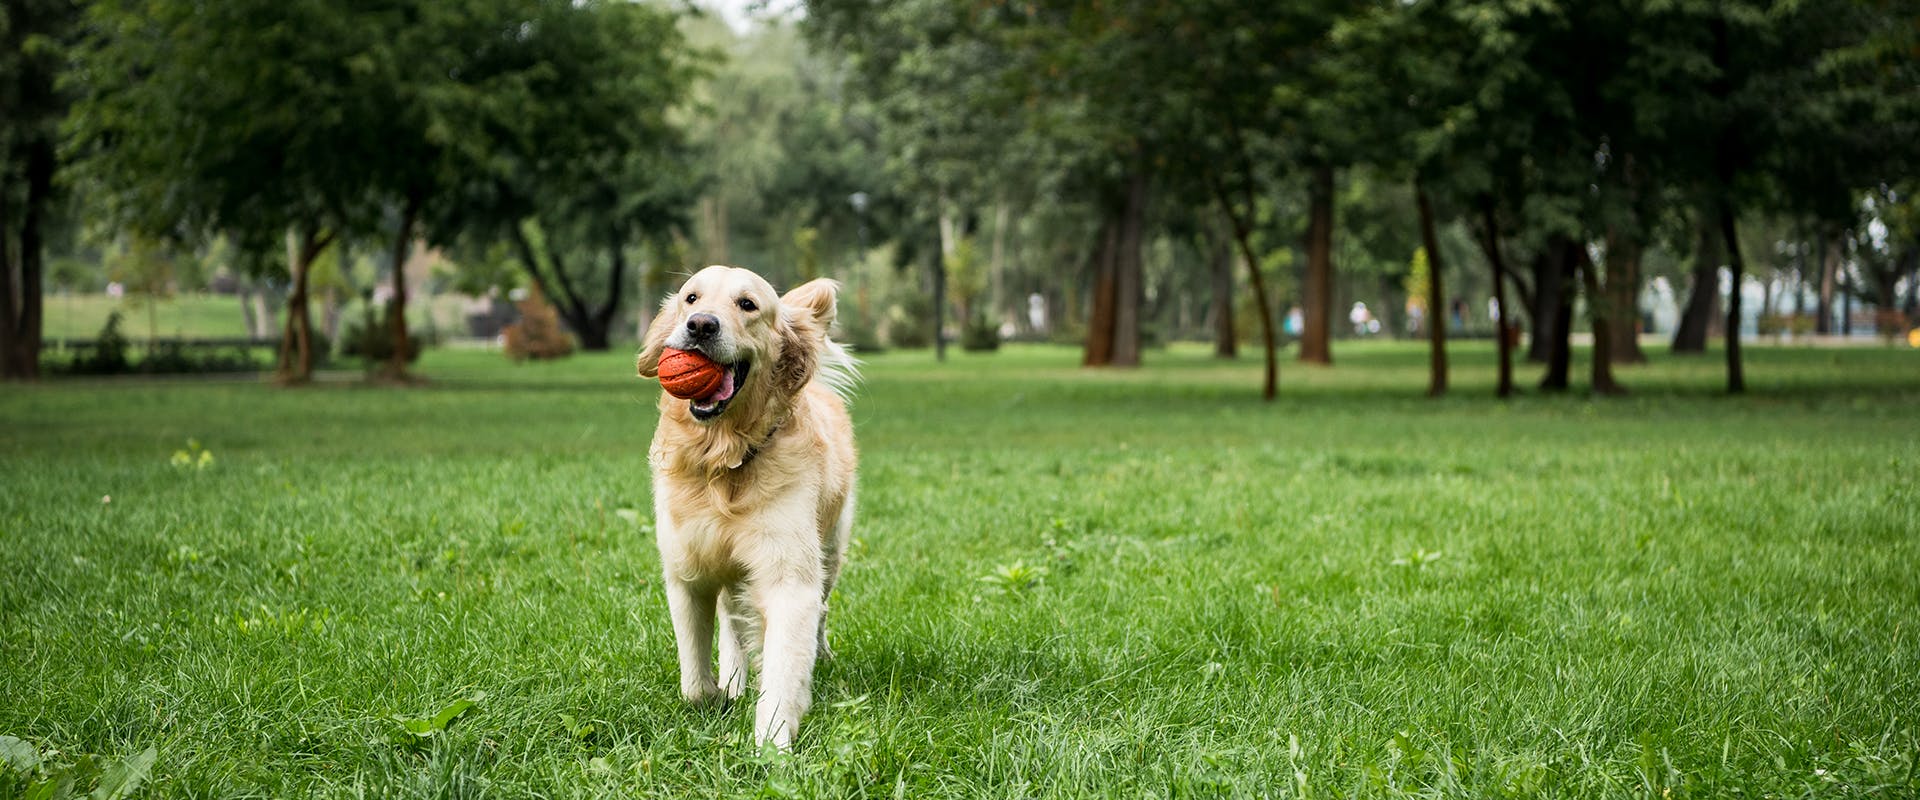 A dog running through a dog park with a red ball in its mouth